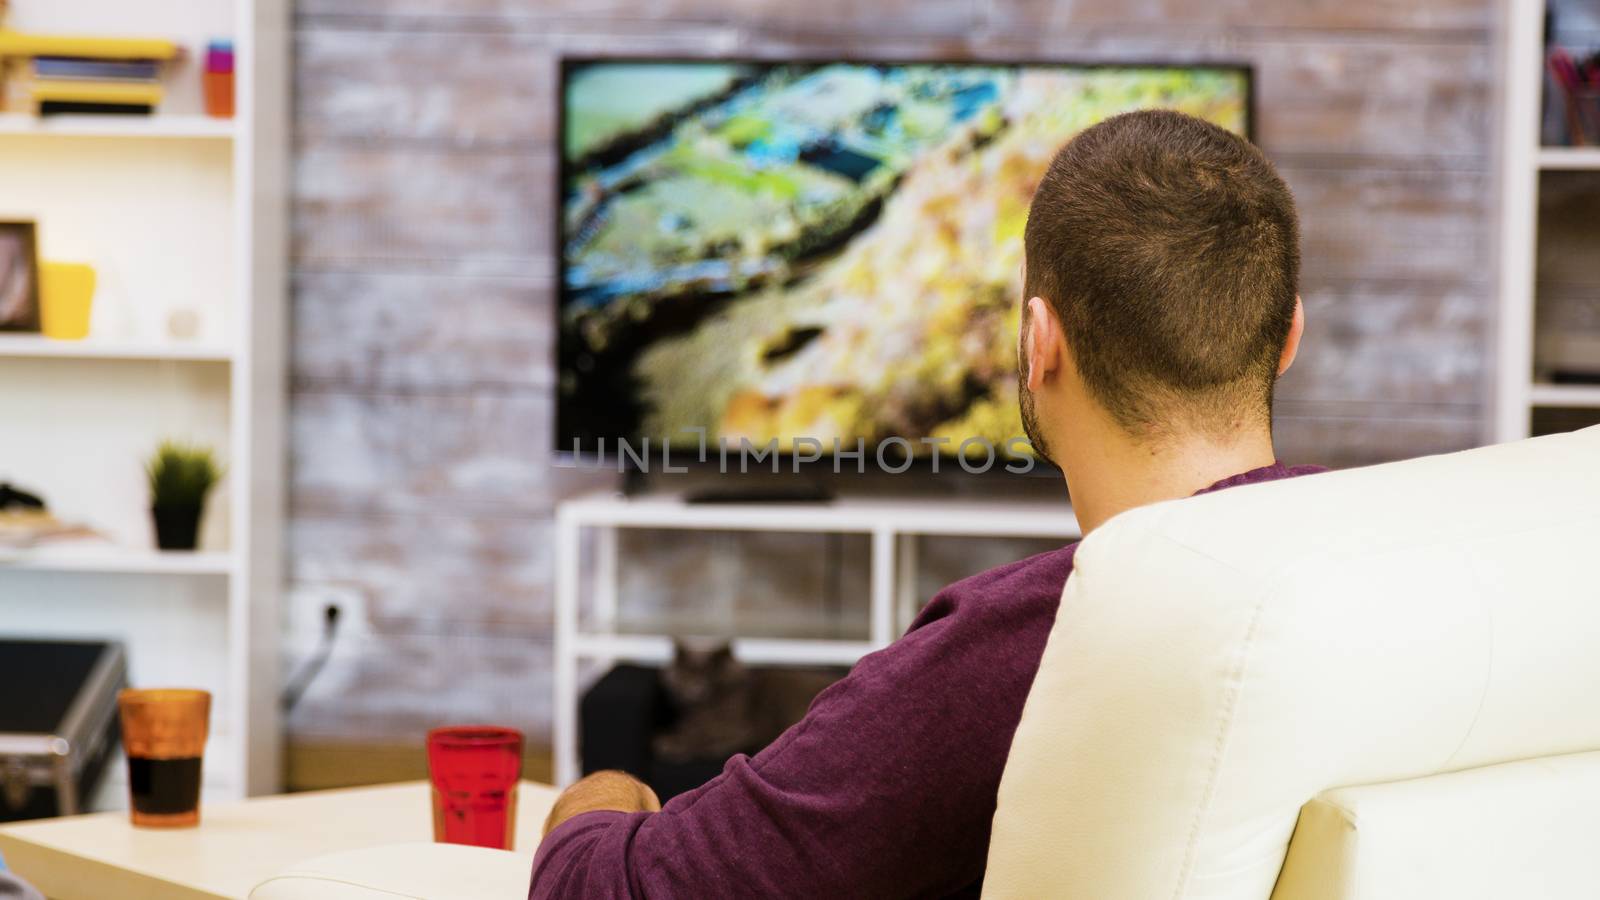 Back view of young man sitting on chair eating popcorn in front of tv.